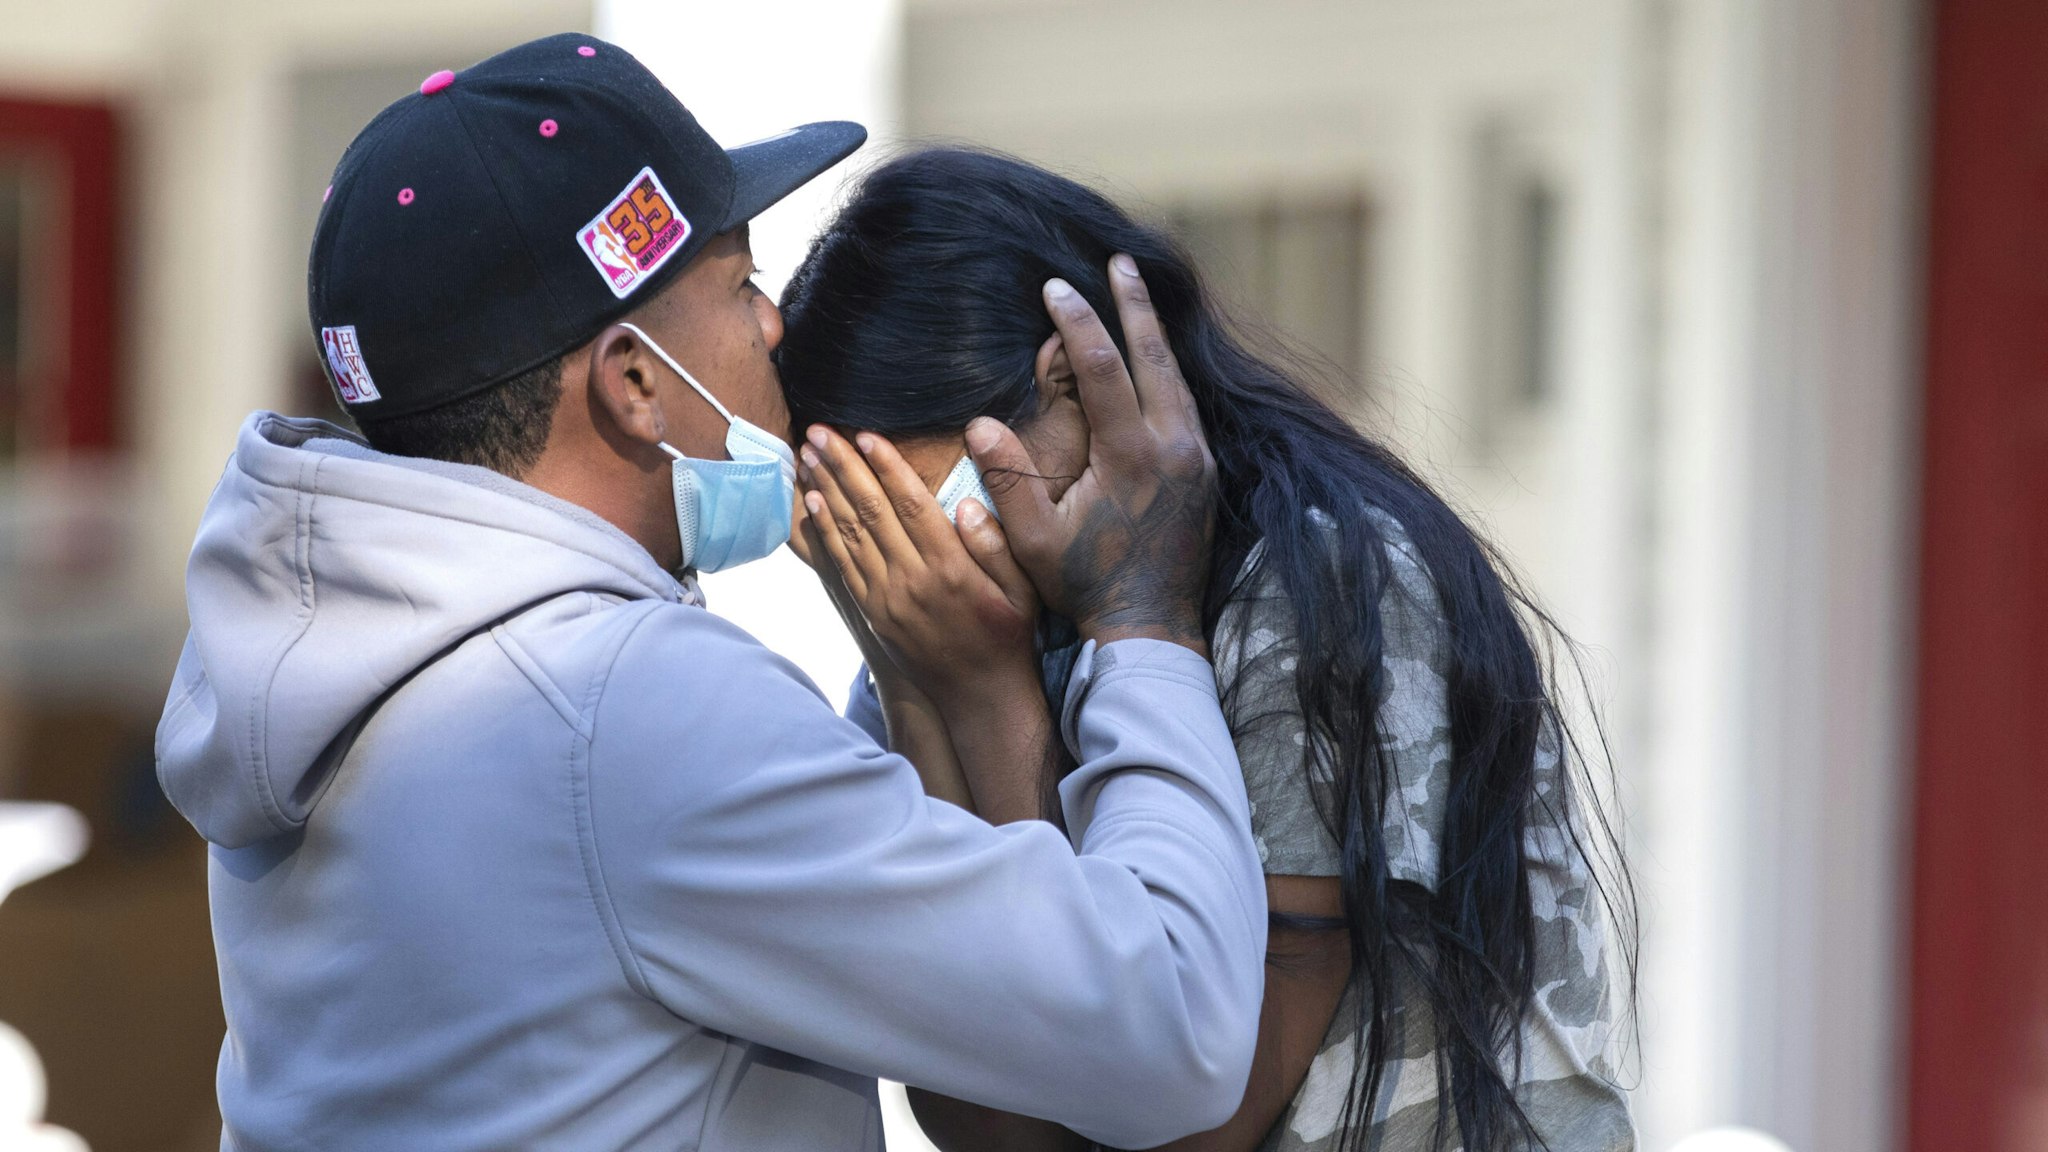 Edgartown MA - September 15th 2022: Rafael Eduardo (left) an undocumented immigrant from Venezuela hugs another immigrant outside of the Saint Andrews Episcopal Church, on Marthas Vineyard.